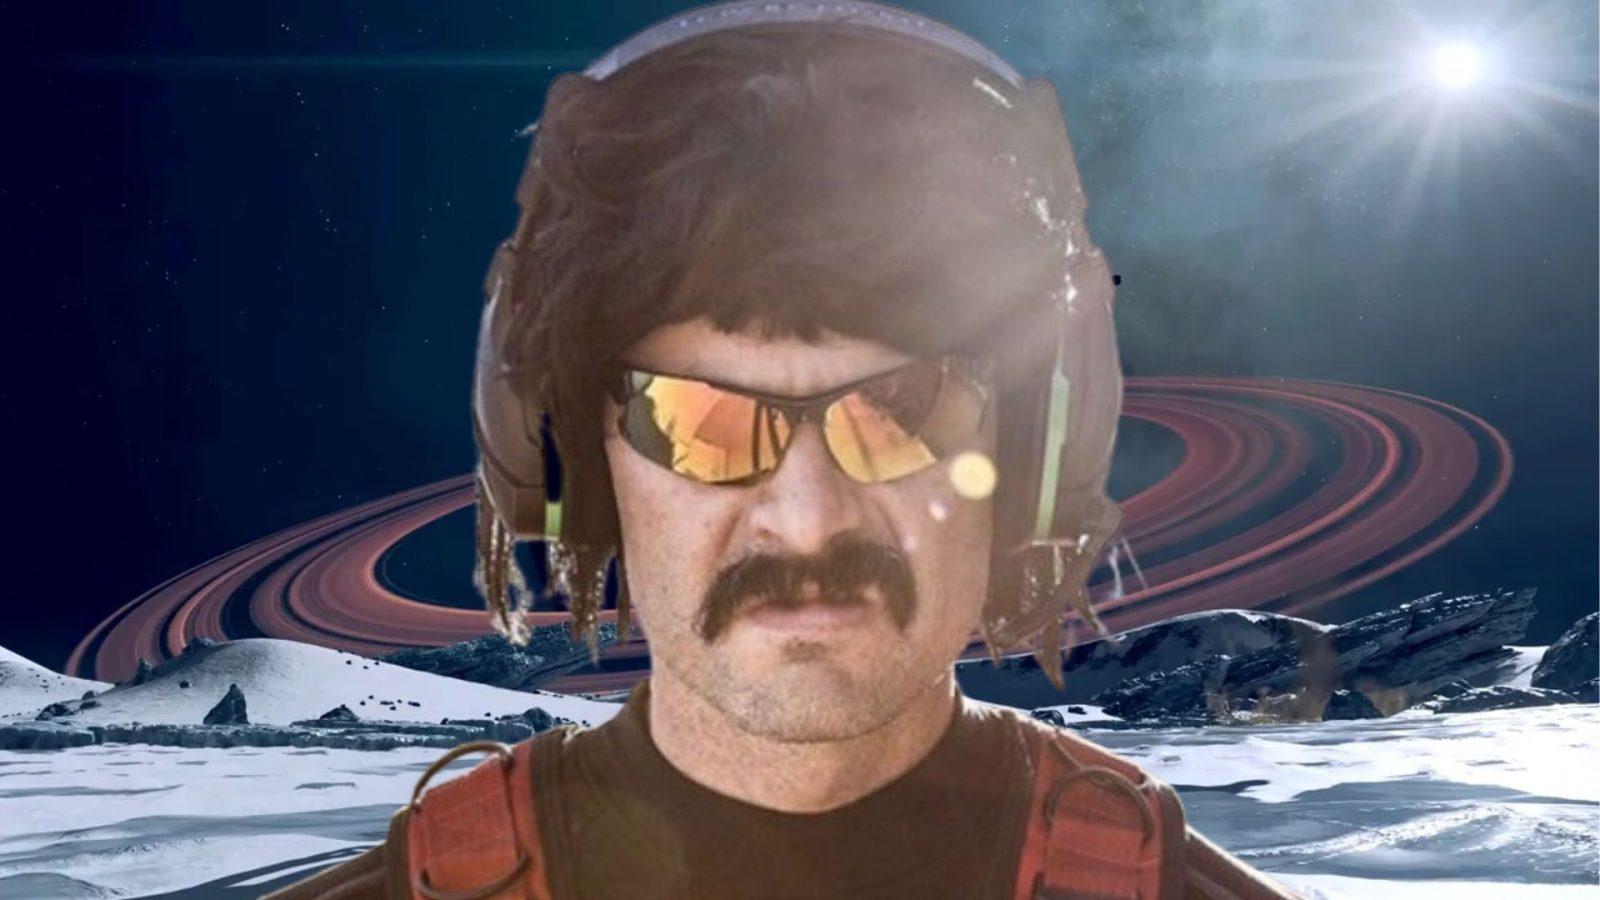 dr disrespect looking angry in starfield space